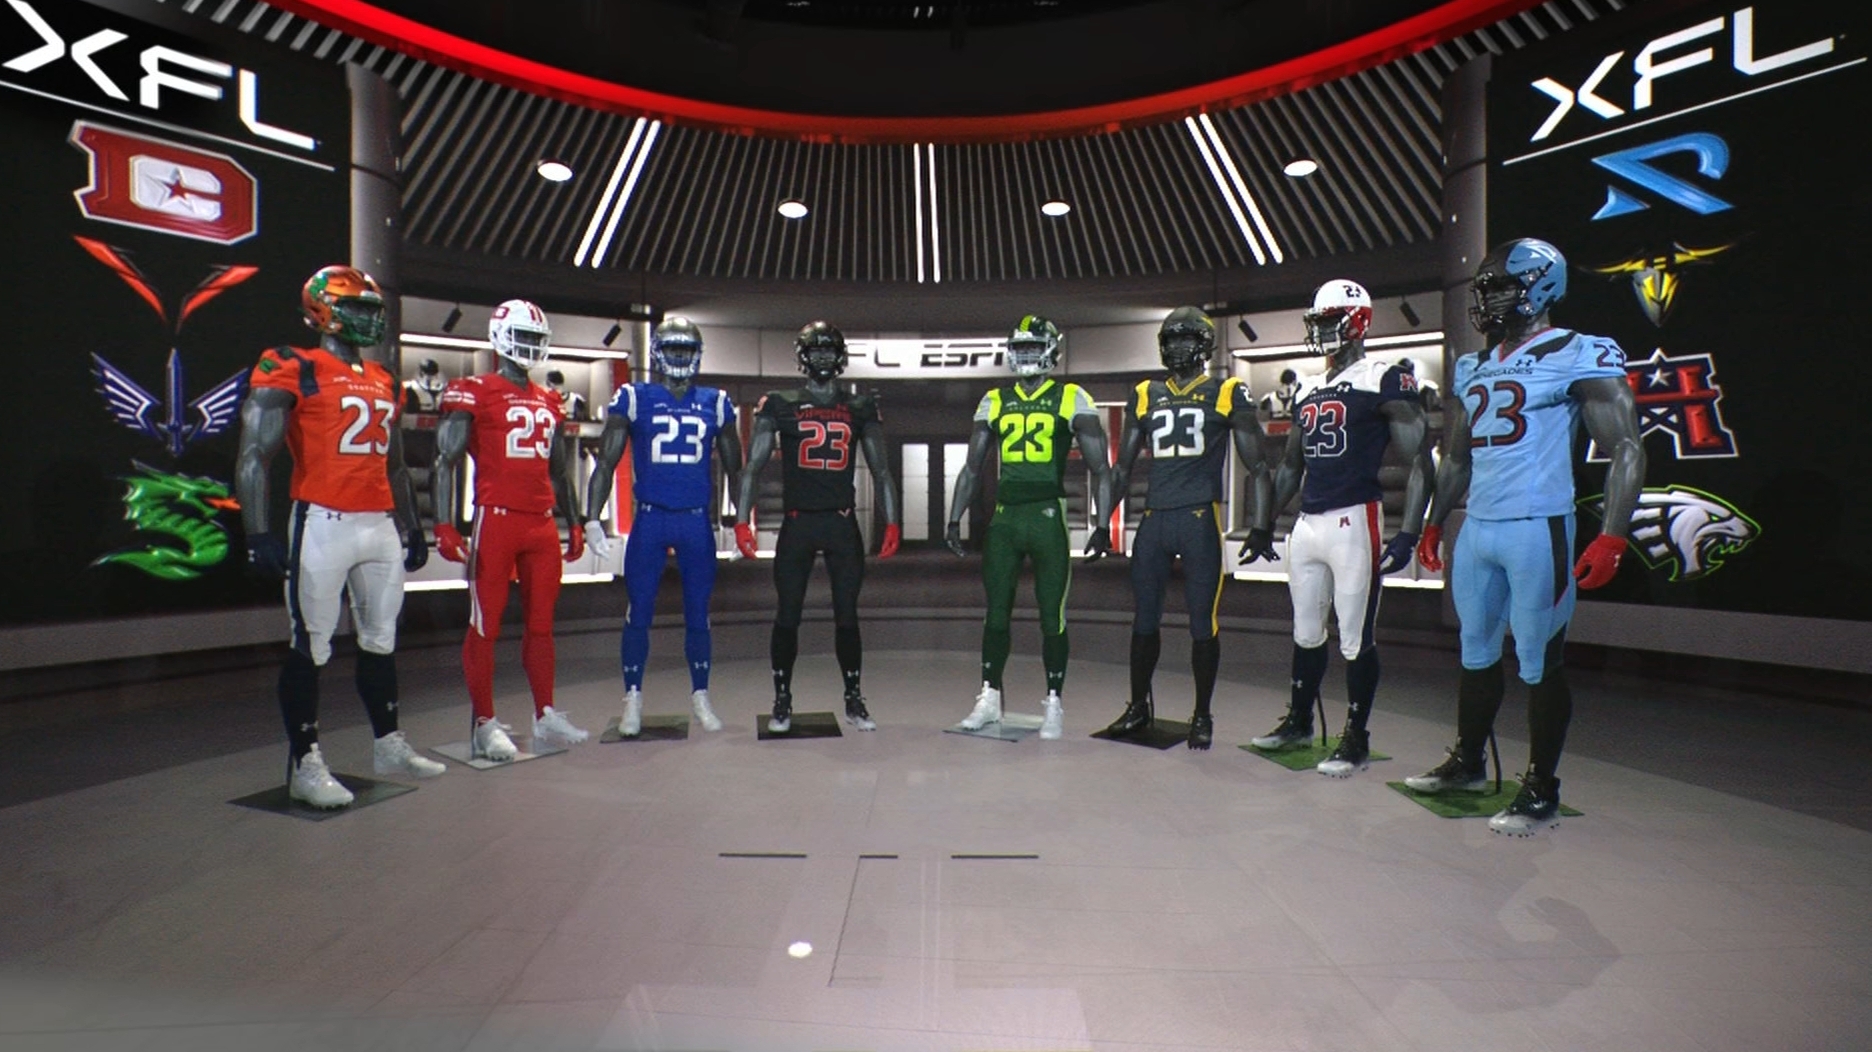 Check out the XFL's fresh new jerseys and helmets